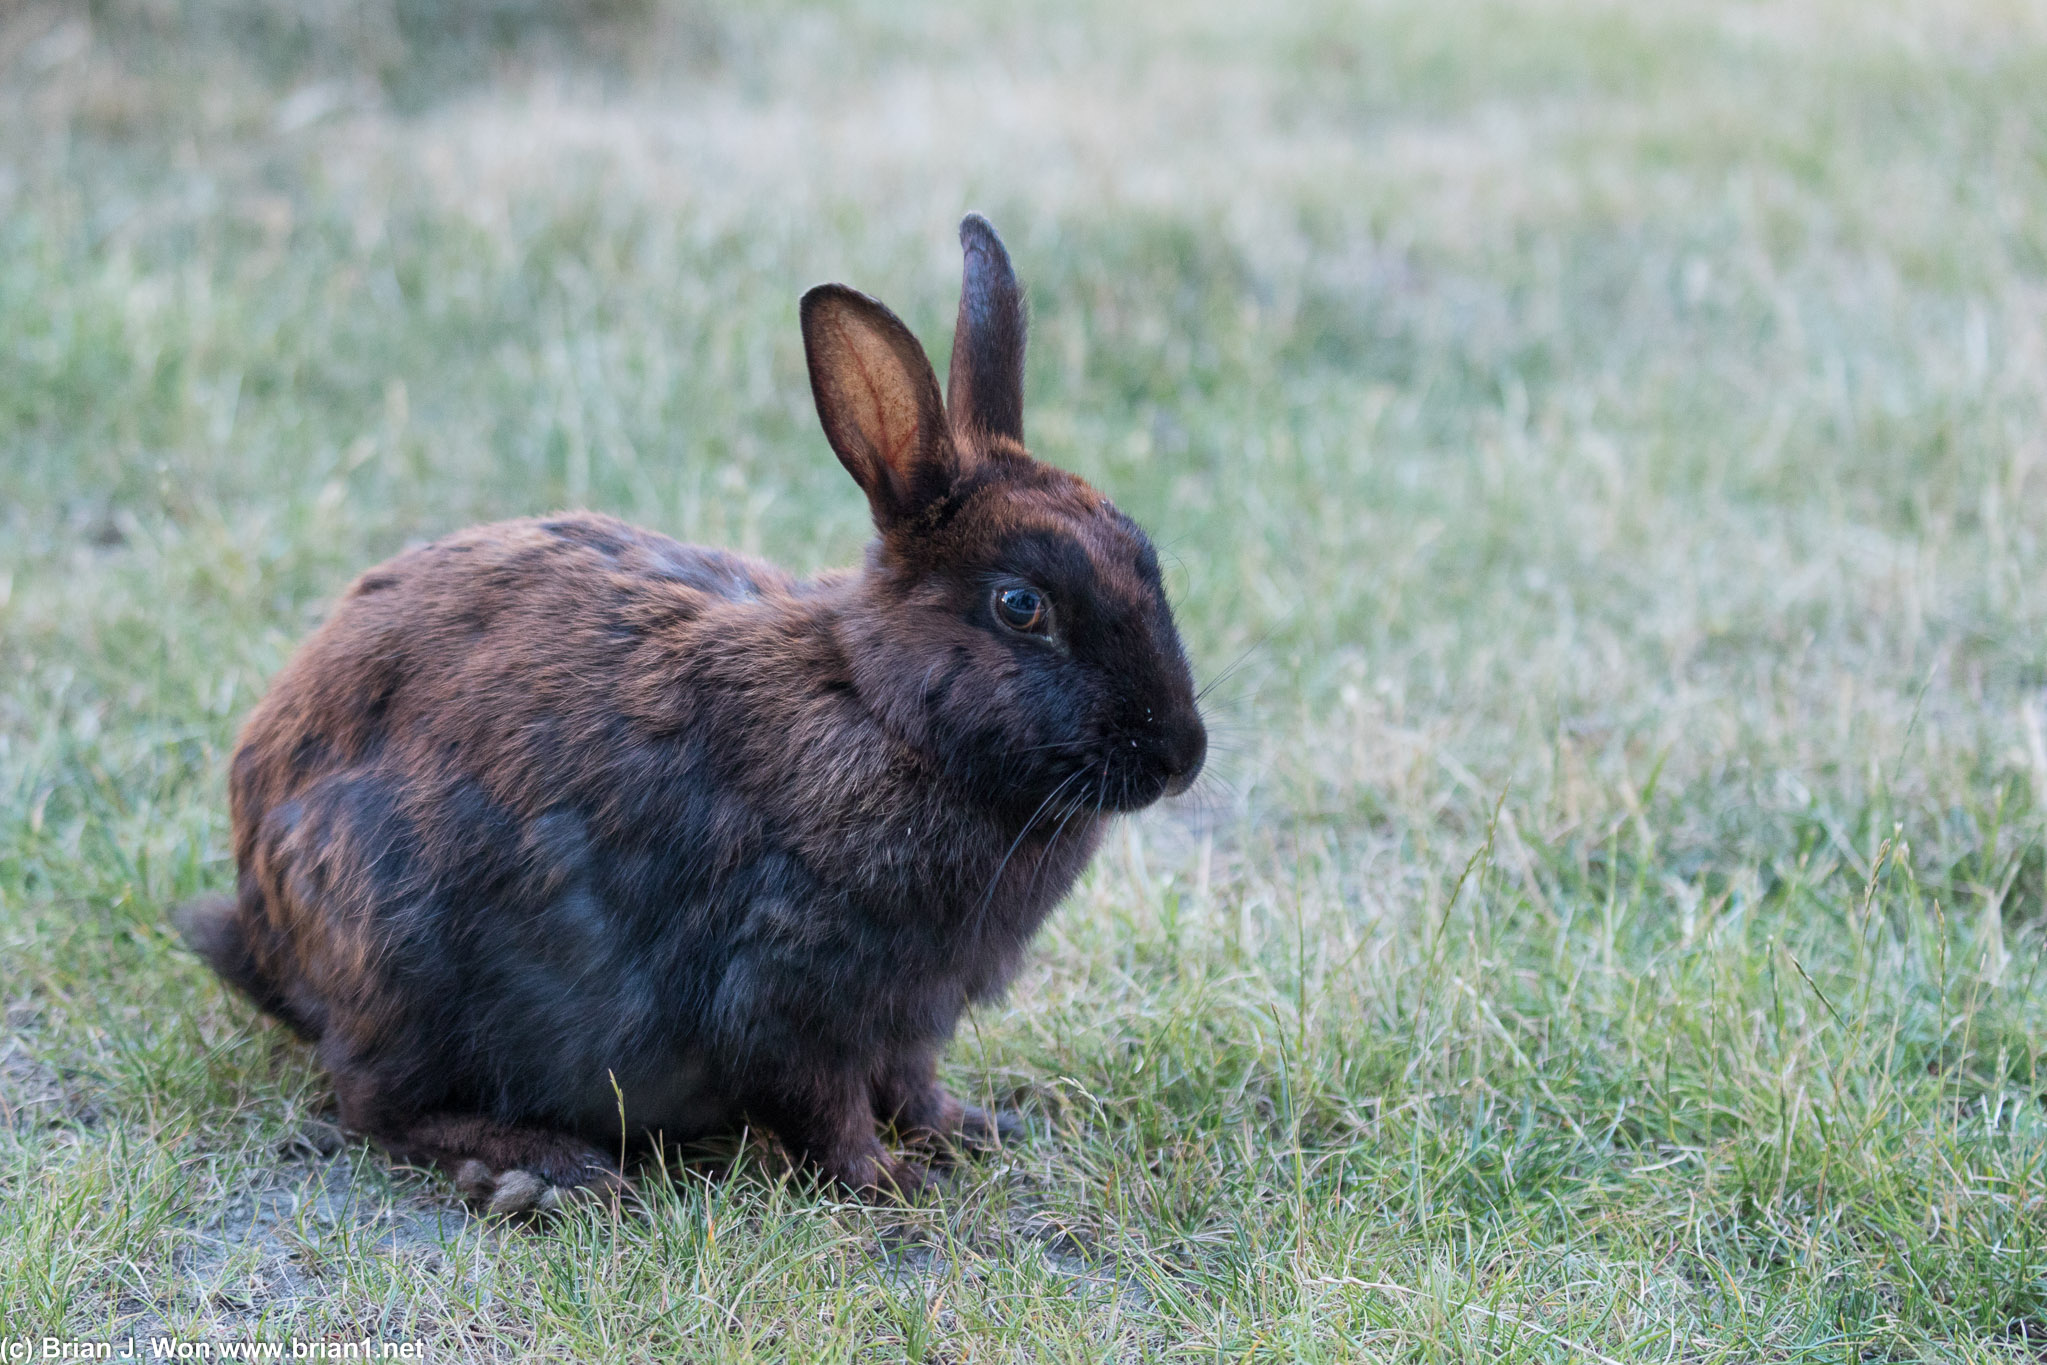 Mottled brown and black. For a rabbit, this guy had no fear of humans.